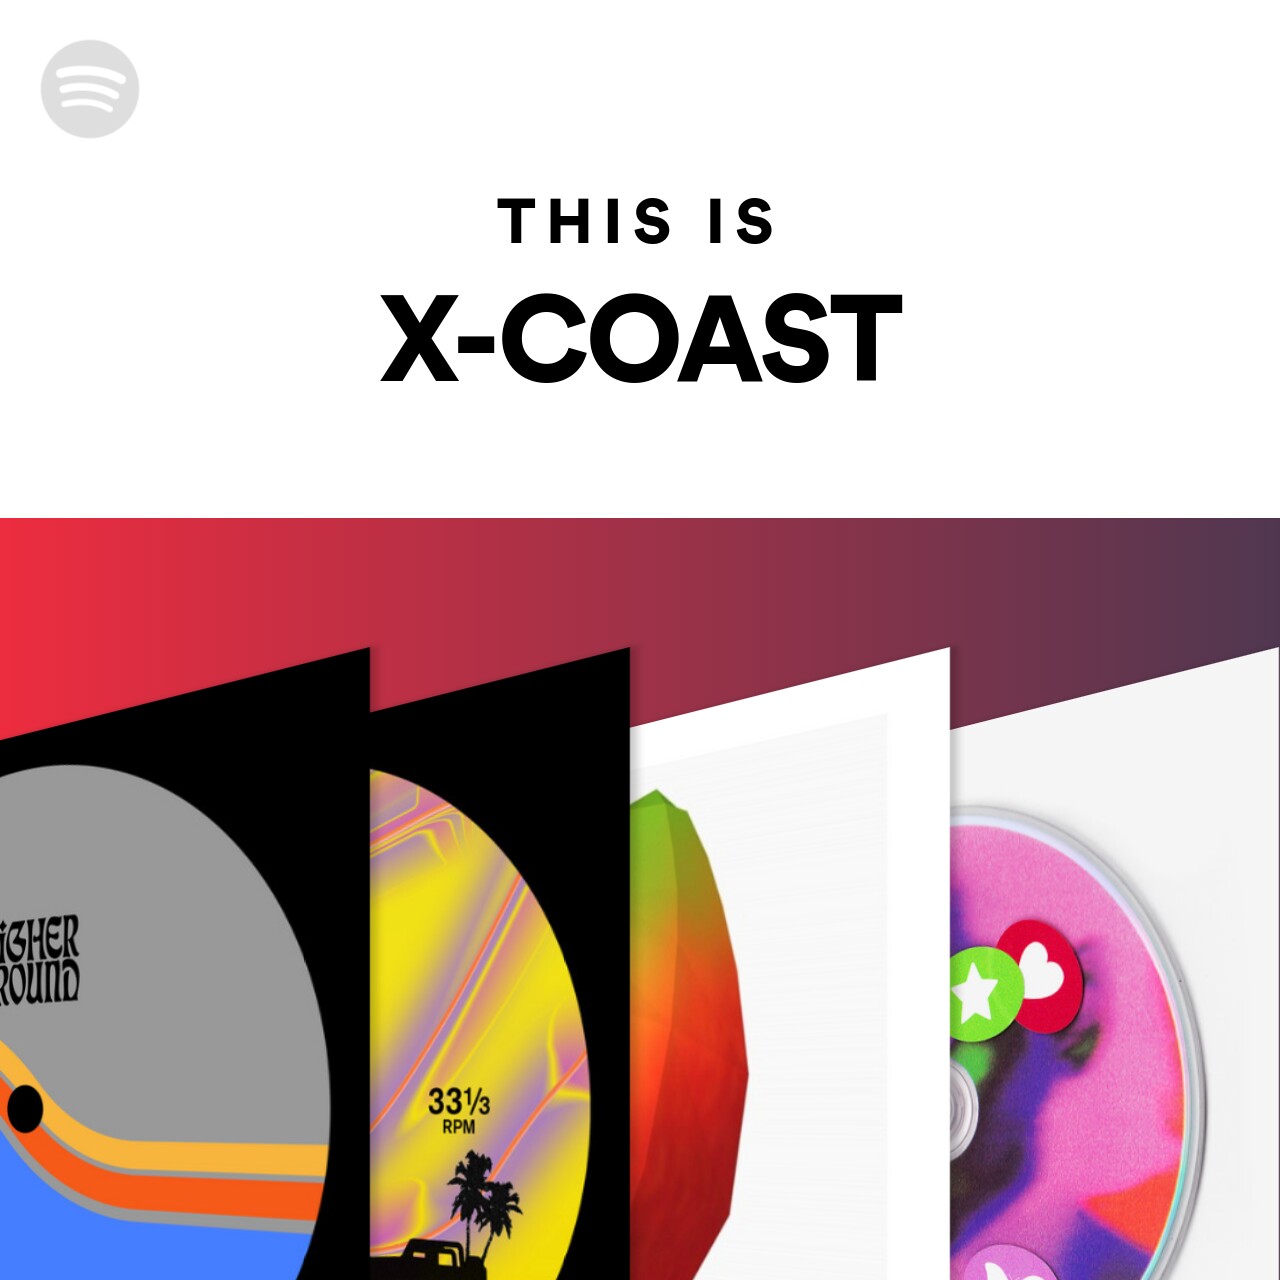 This Is X-COAST